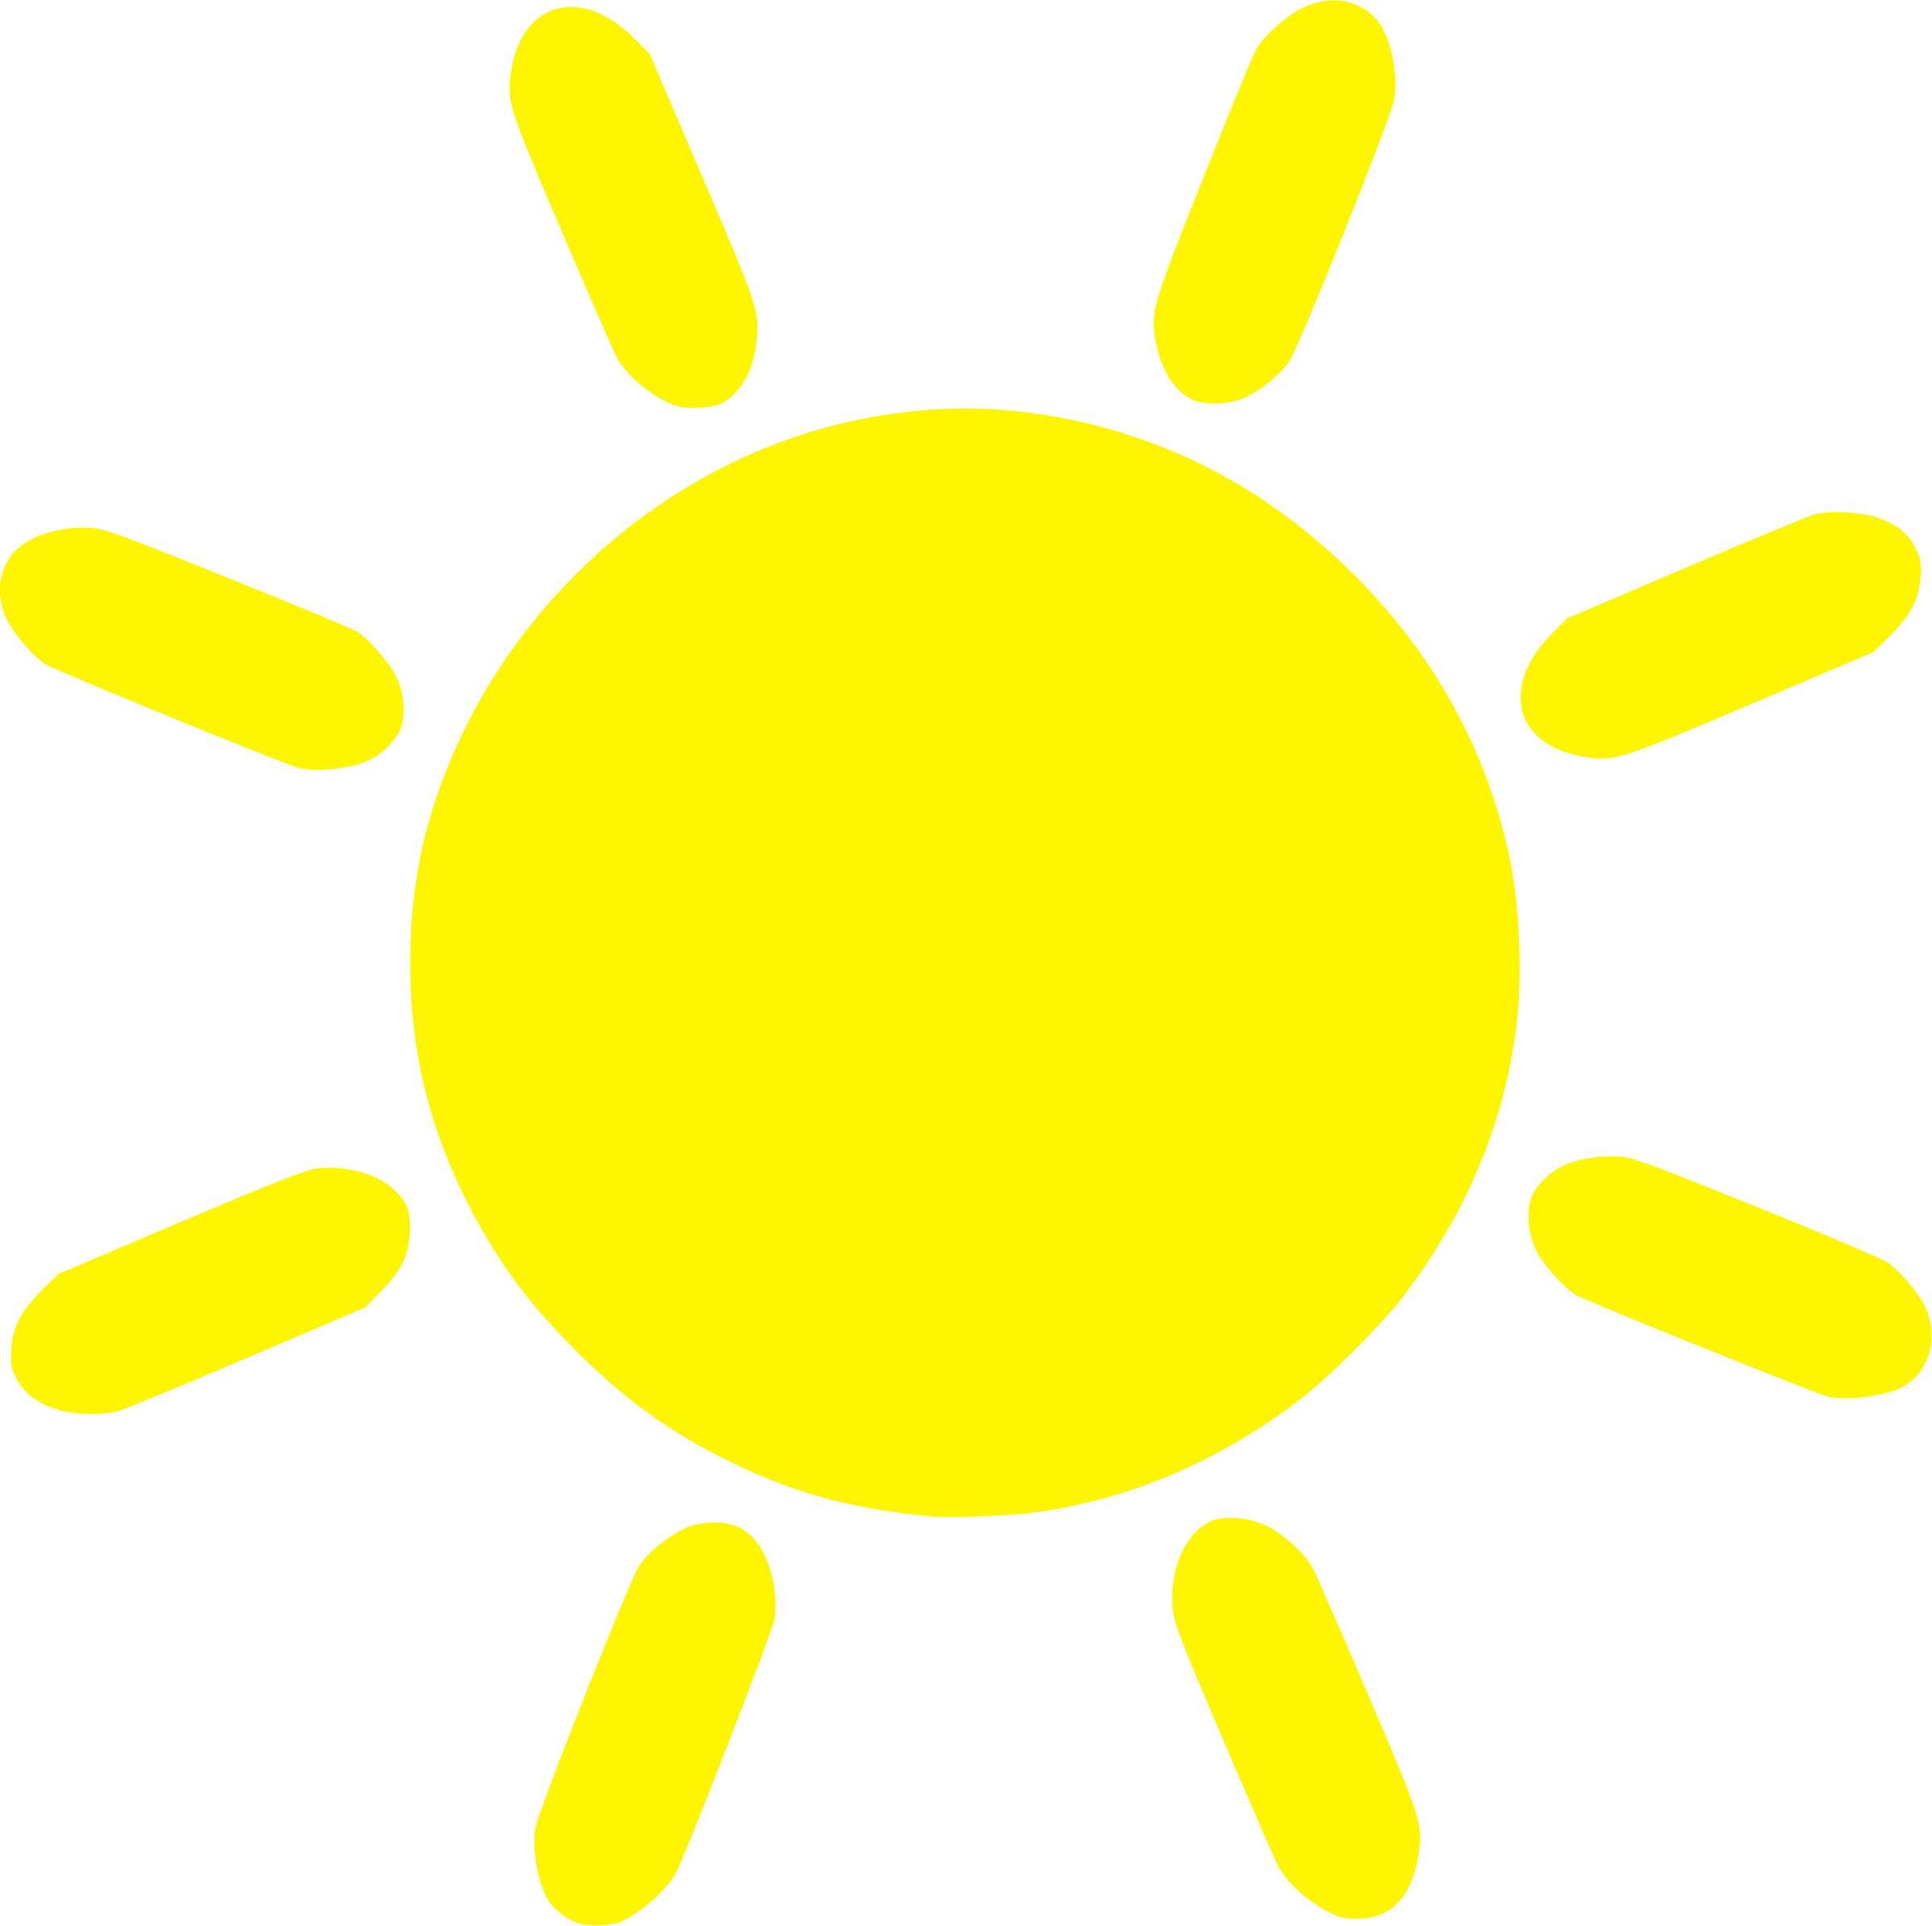 free sun clipart images | Fre